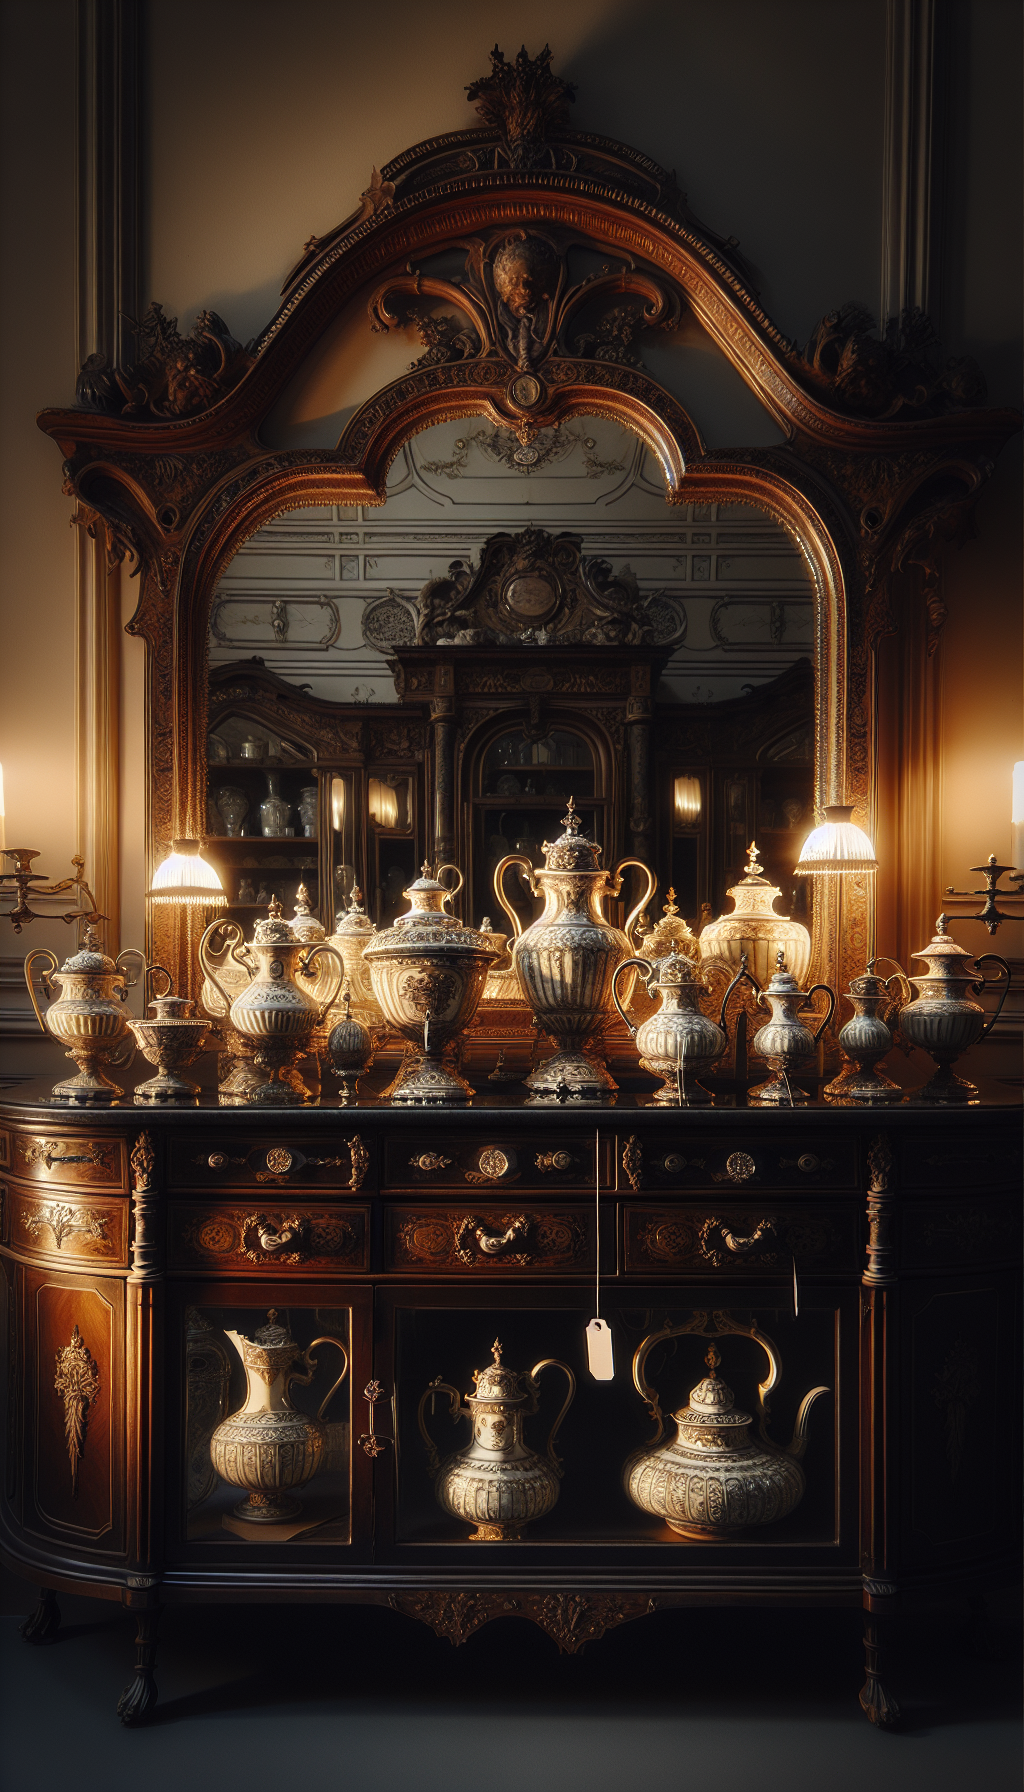 An elegant Victorian-style sideboard displays a curated collection of pristine antique wash basins and pitchers, each basking in a spotlight that casts a soft gleam on their intricate designs. A series of price tags subtly dangle from the pieces, with a large, ornately framed mirror behind them reflecting their perceived value and the proud legacy of their craftsmanship.